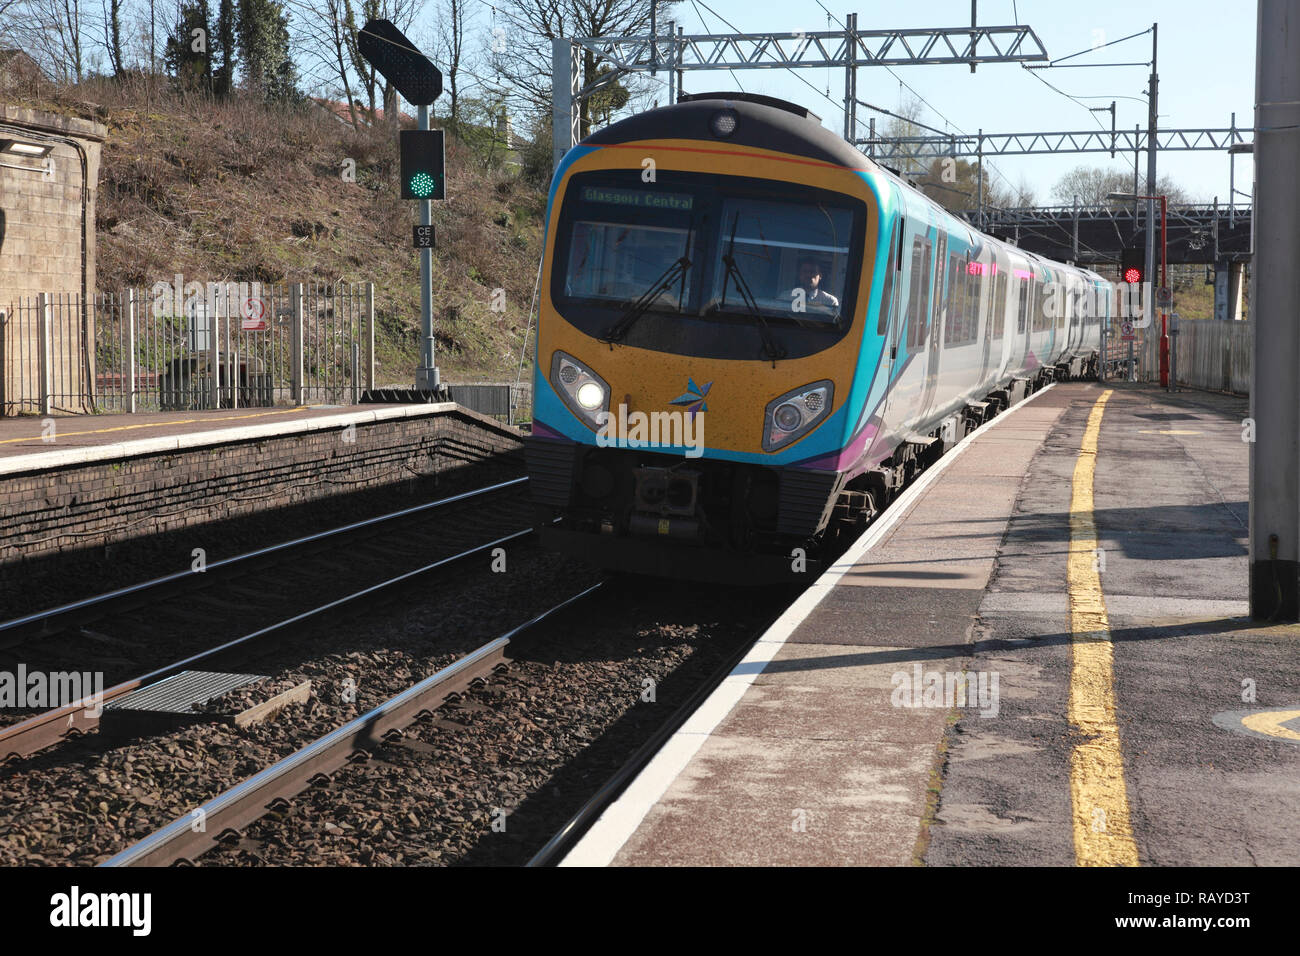 A TransPennine Express train approaching Platform 2 at Oxenholme station in the Lake District, Cumbria, northern England Stock Photo